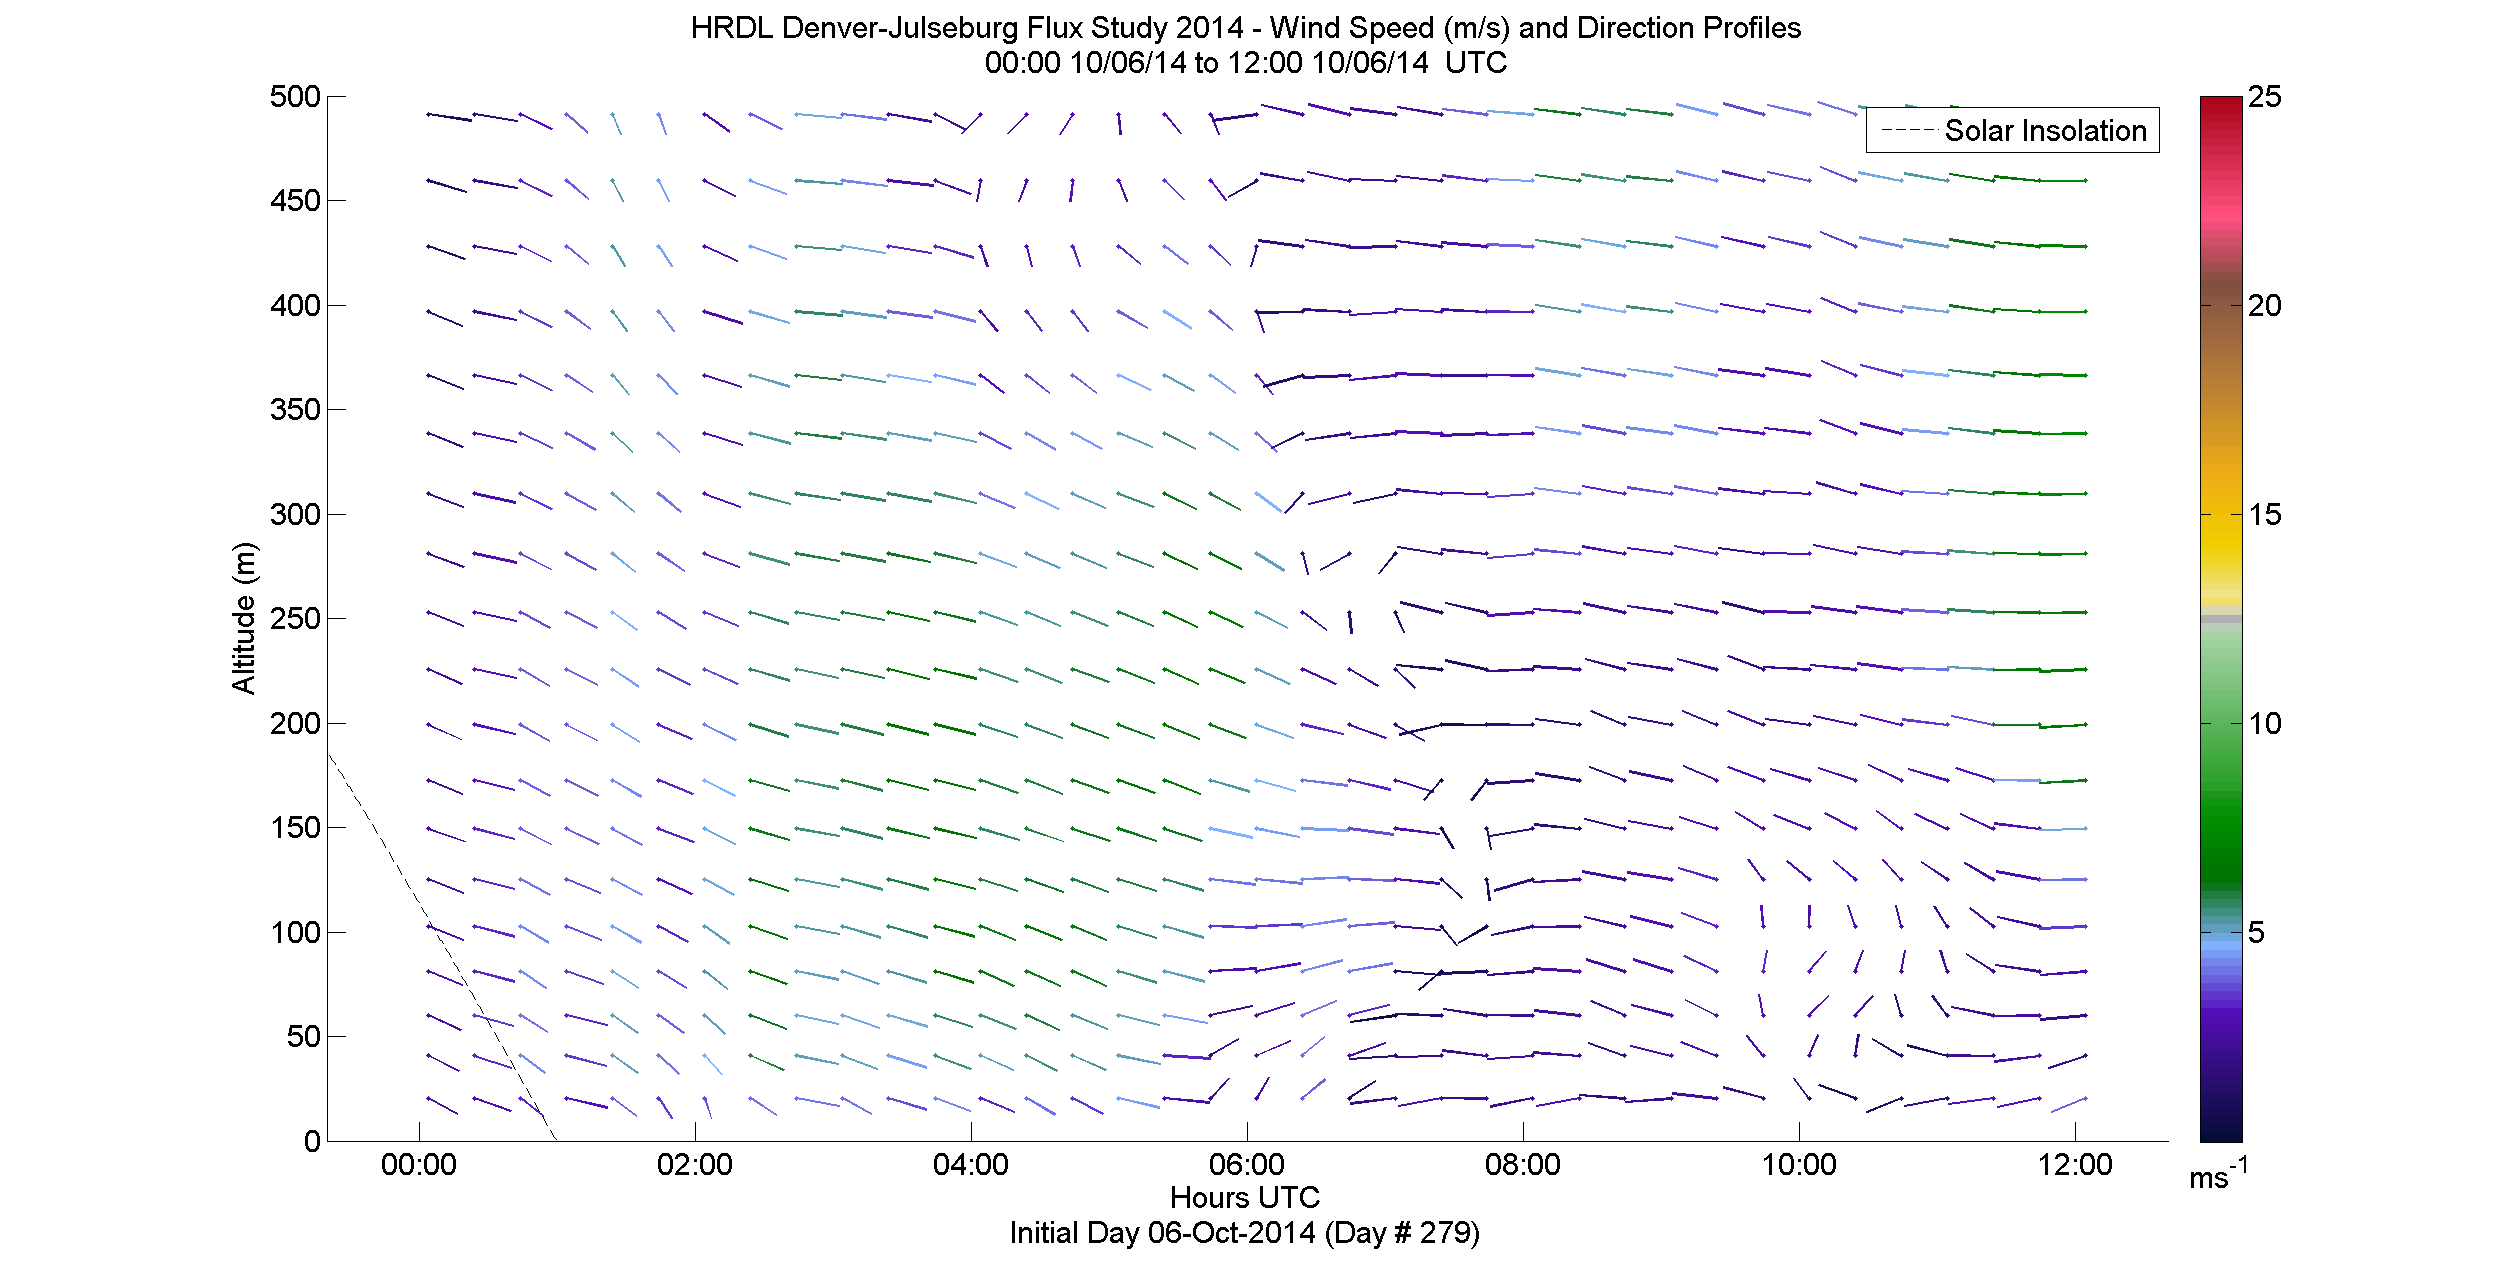 HRDL speed and direction profile - October 6 am